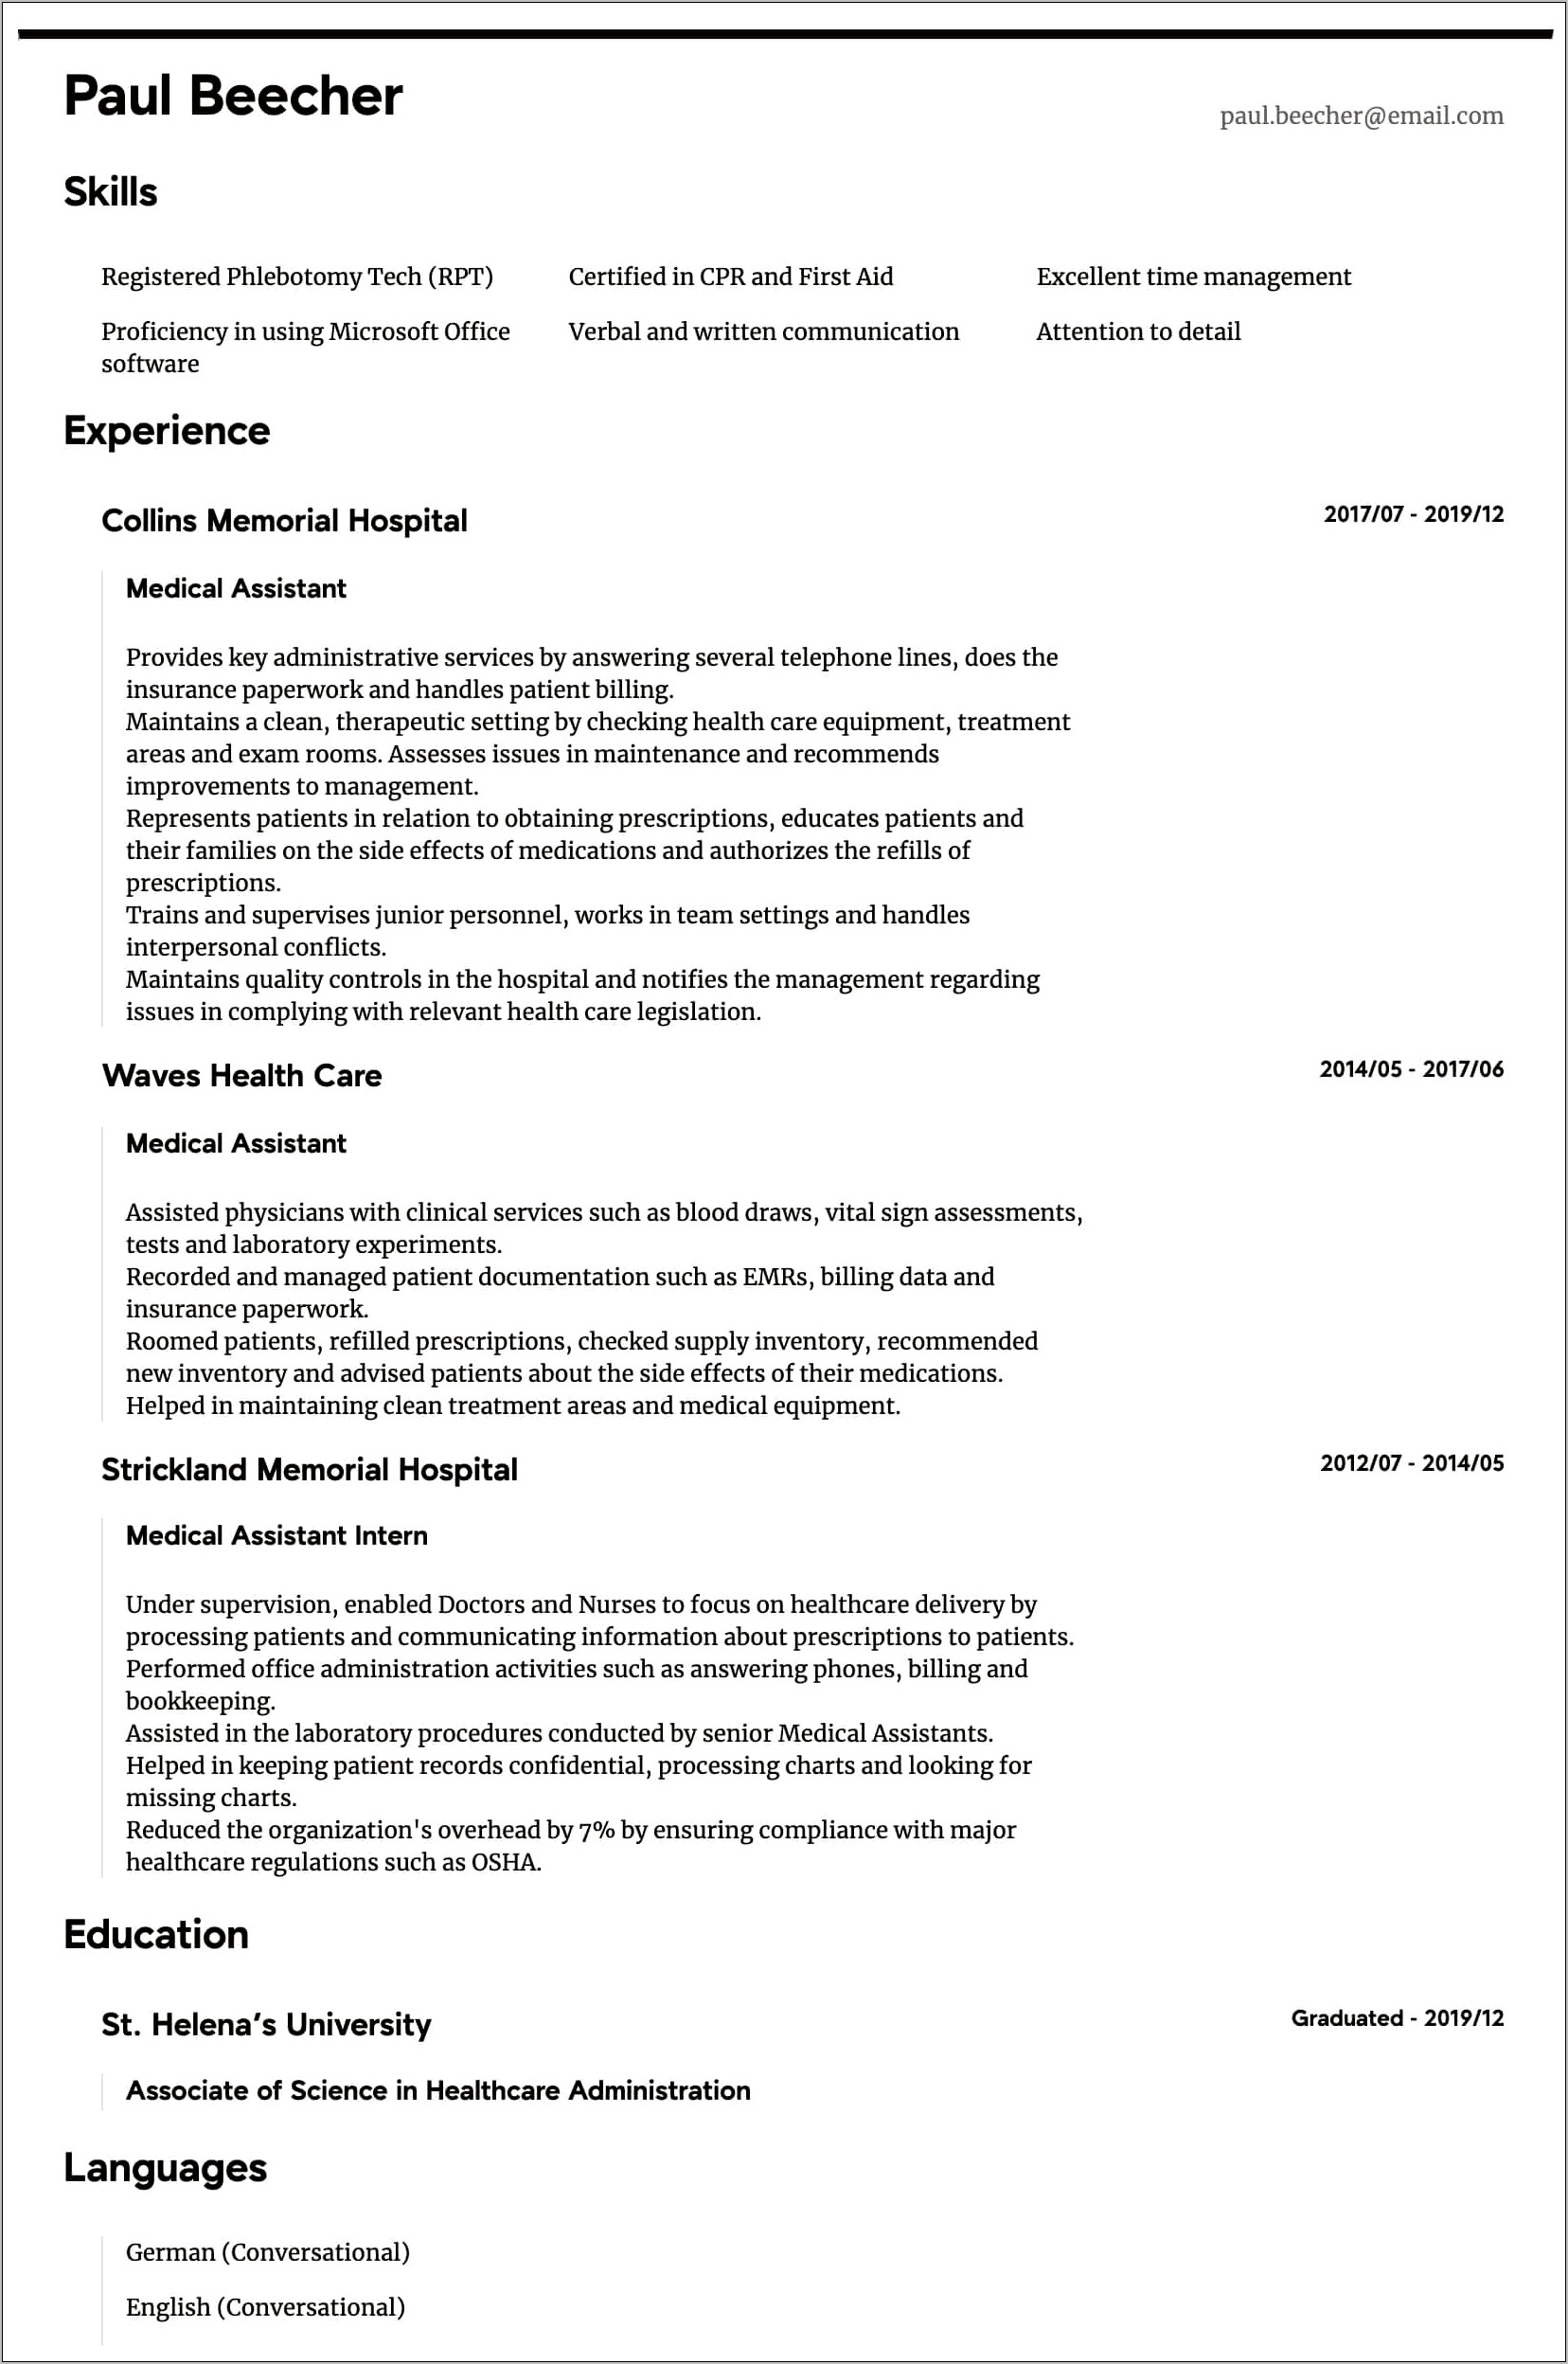 Resume Objective Examples Healthcare Management